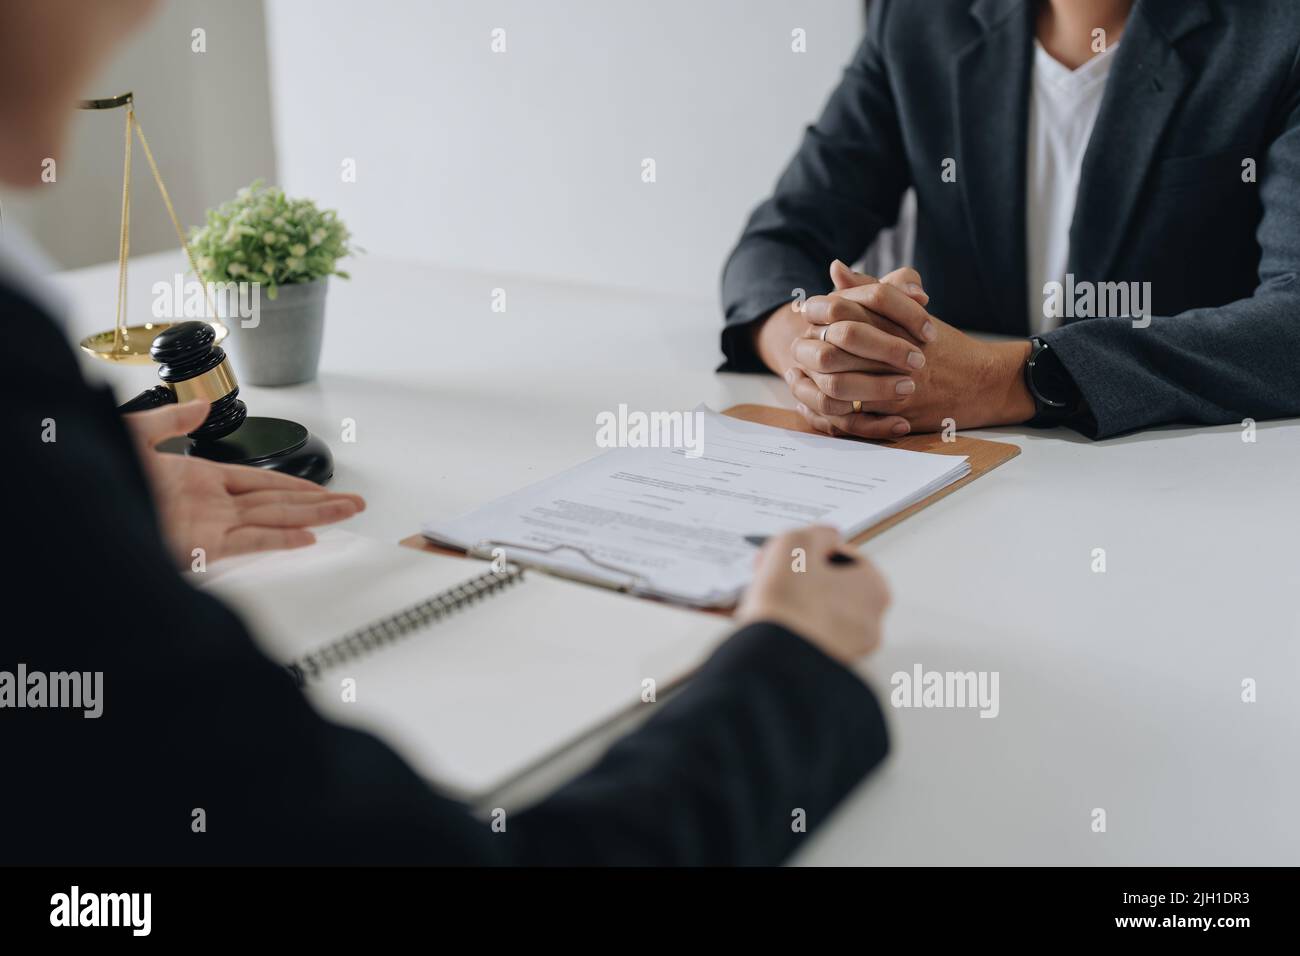 Good service cooperation, Consultation of Businesswoman and Male lawyer or judge counselor having team meeting with client, Law and Legal services Stock Photo